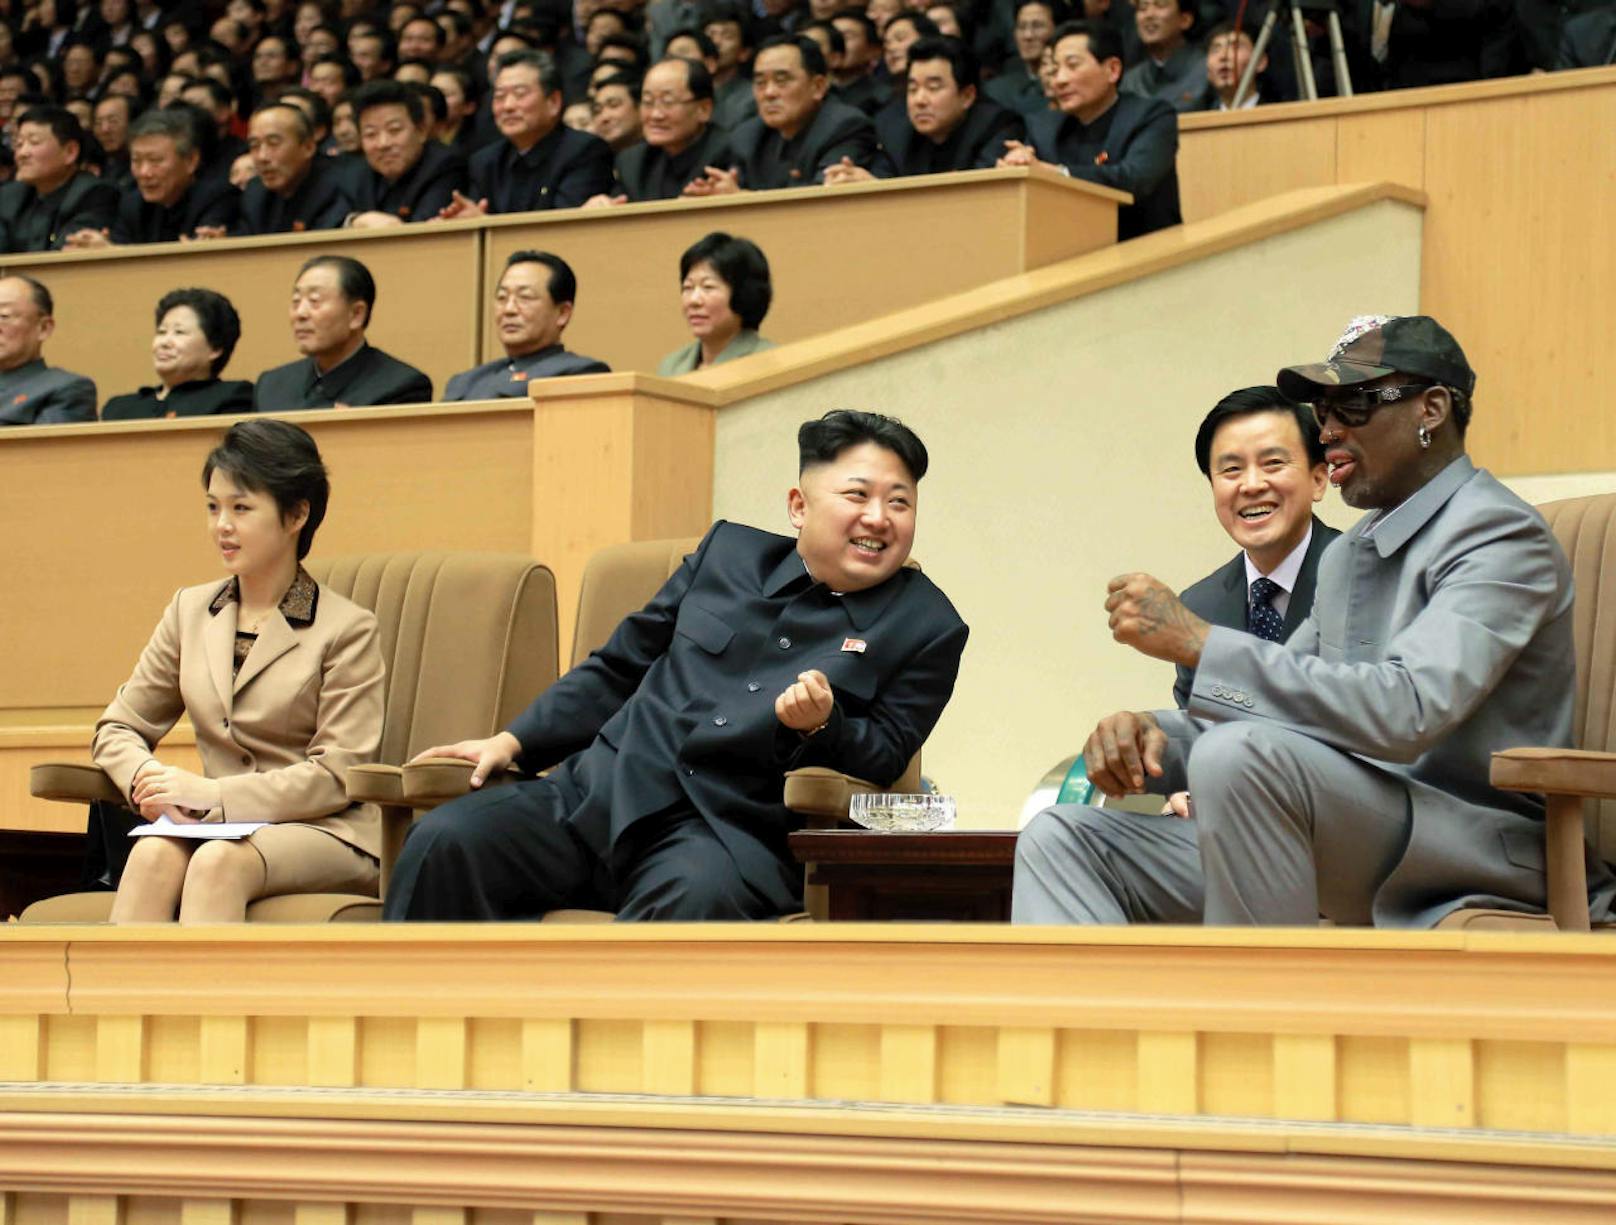 North Korean leader Kim Jong Un (2nd L) watches a basketball game between former U.S. NBA basketball players and North Korean players of the Hwaebul team of the DPRK with Dennis Rodman (R) at Pyongyang Indoor Stadium in this undated photo released by North Korea's Korean Central News Agency (KCNA) in Pyongyang January 9, 2014. REUTERS/KCNA (NORTH KOREA - Tags: POLITICS SPORT BASKETBALL TPX IMAGES OF THE DAY)  ATTENTION EDITORS - THIS PICTURE WAS PROVIDED BY A THIRD PARTY. REUTERS IS UNABLE TO INDEPENDENTLY VERIFY THE AUTHENTICITY, CONTENT, LOCATION OR DATE OF THIS IMAGE. FOR EDITORIAL USE ONLY. NOT FOR SALE FOR MARKETING OR ADVERTISING CAMPAIGNS. THIS PICTURE IS DISTRIBUTED EXACTLY AS RECEIVED BY REUTERS, AS A SERVICE TO CLIENTS. NO THIRD PARTY SALES. NOT FOR USE BY REUTERS THIRD PARTY DISTRIBUTORS. SOUTH KOREA OUT. NO COMMERCIAL OR EDITORIAL SALES IN SOUTH KOREA - RTX176Y4